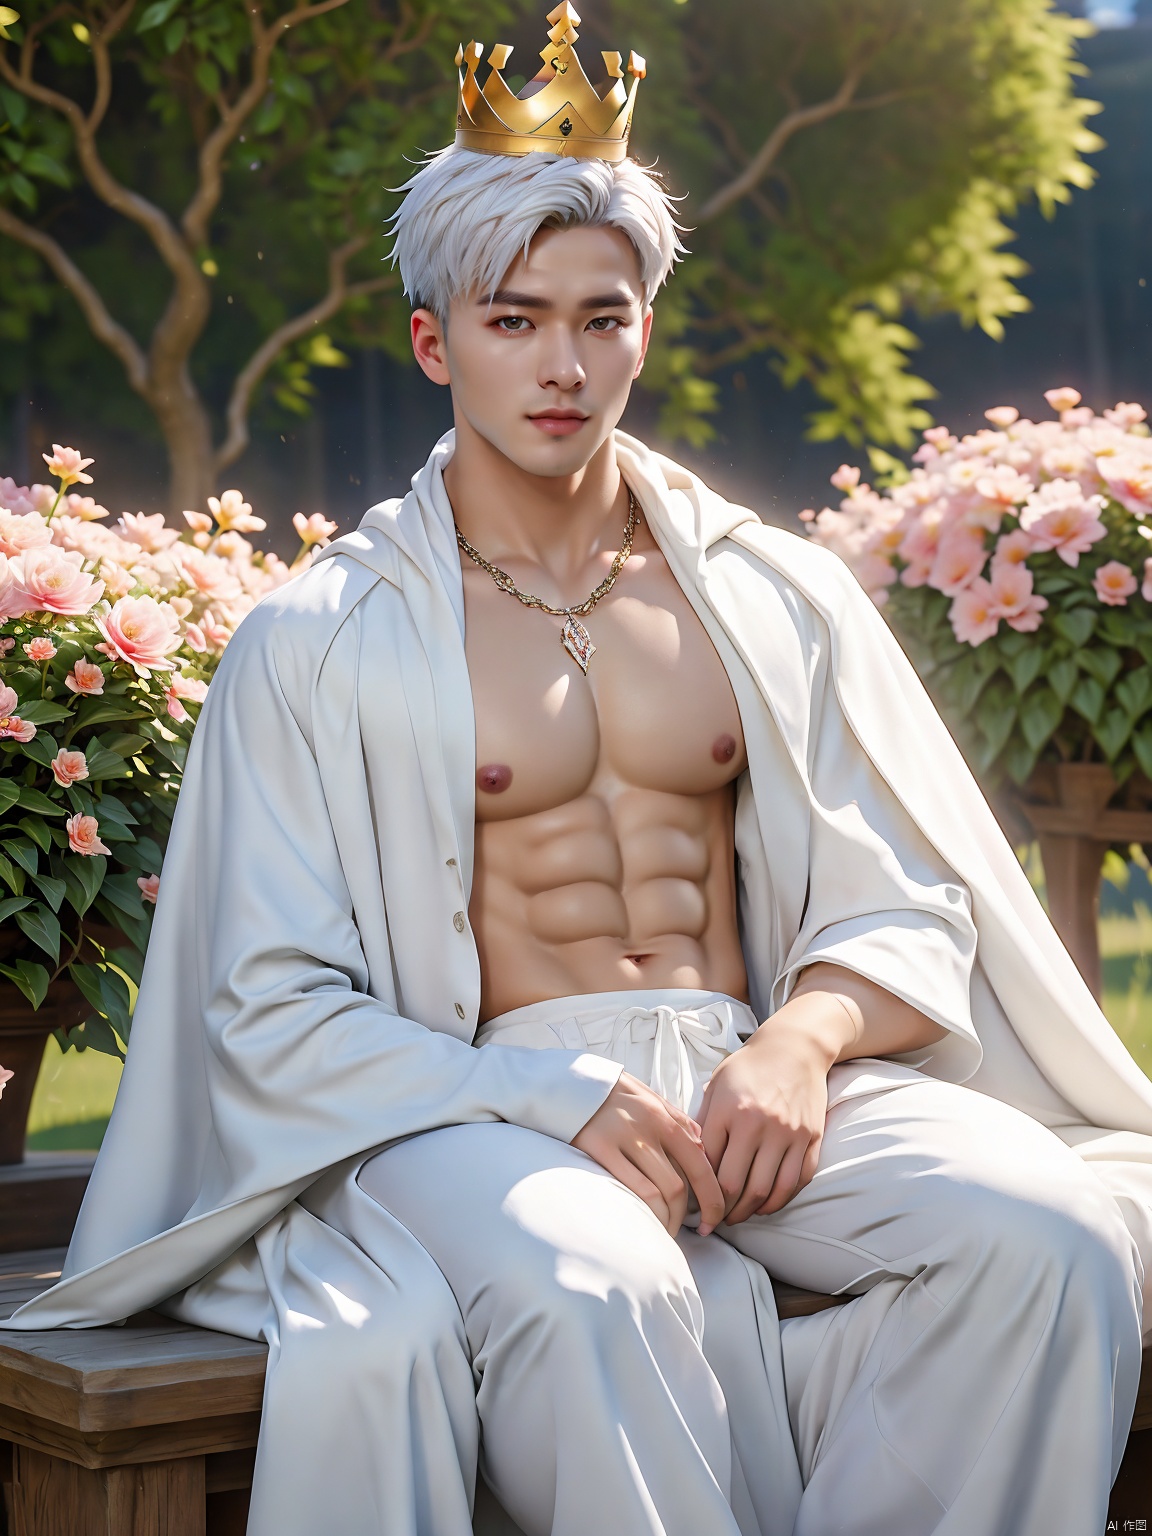  masterpiece,Fortnite,1 boy,Look at me,Handsome,White hair,Muscular development,A gorgeous white cloak,Sitting on the throne,outside,Garden,Flower field,Wear a crown,Natural light,UHD,high details,best quality,